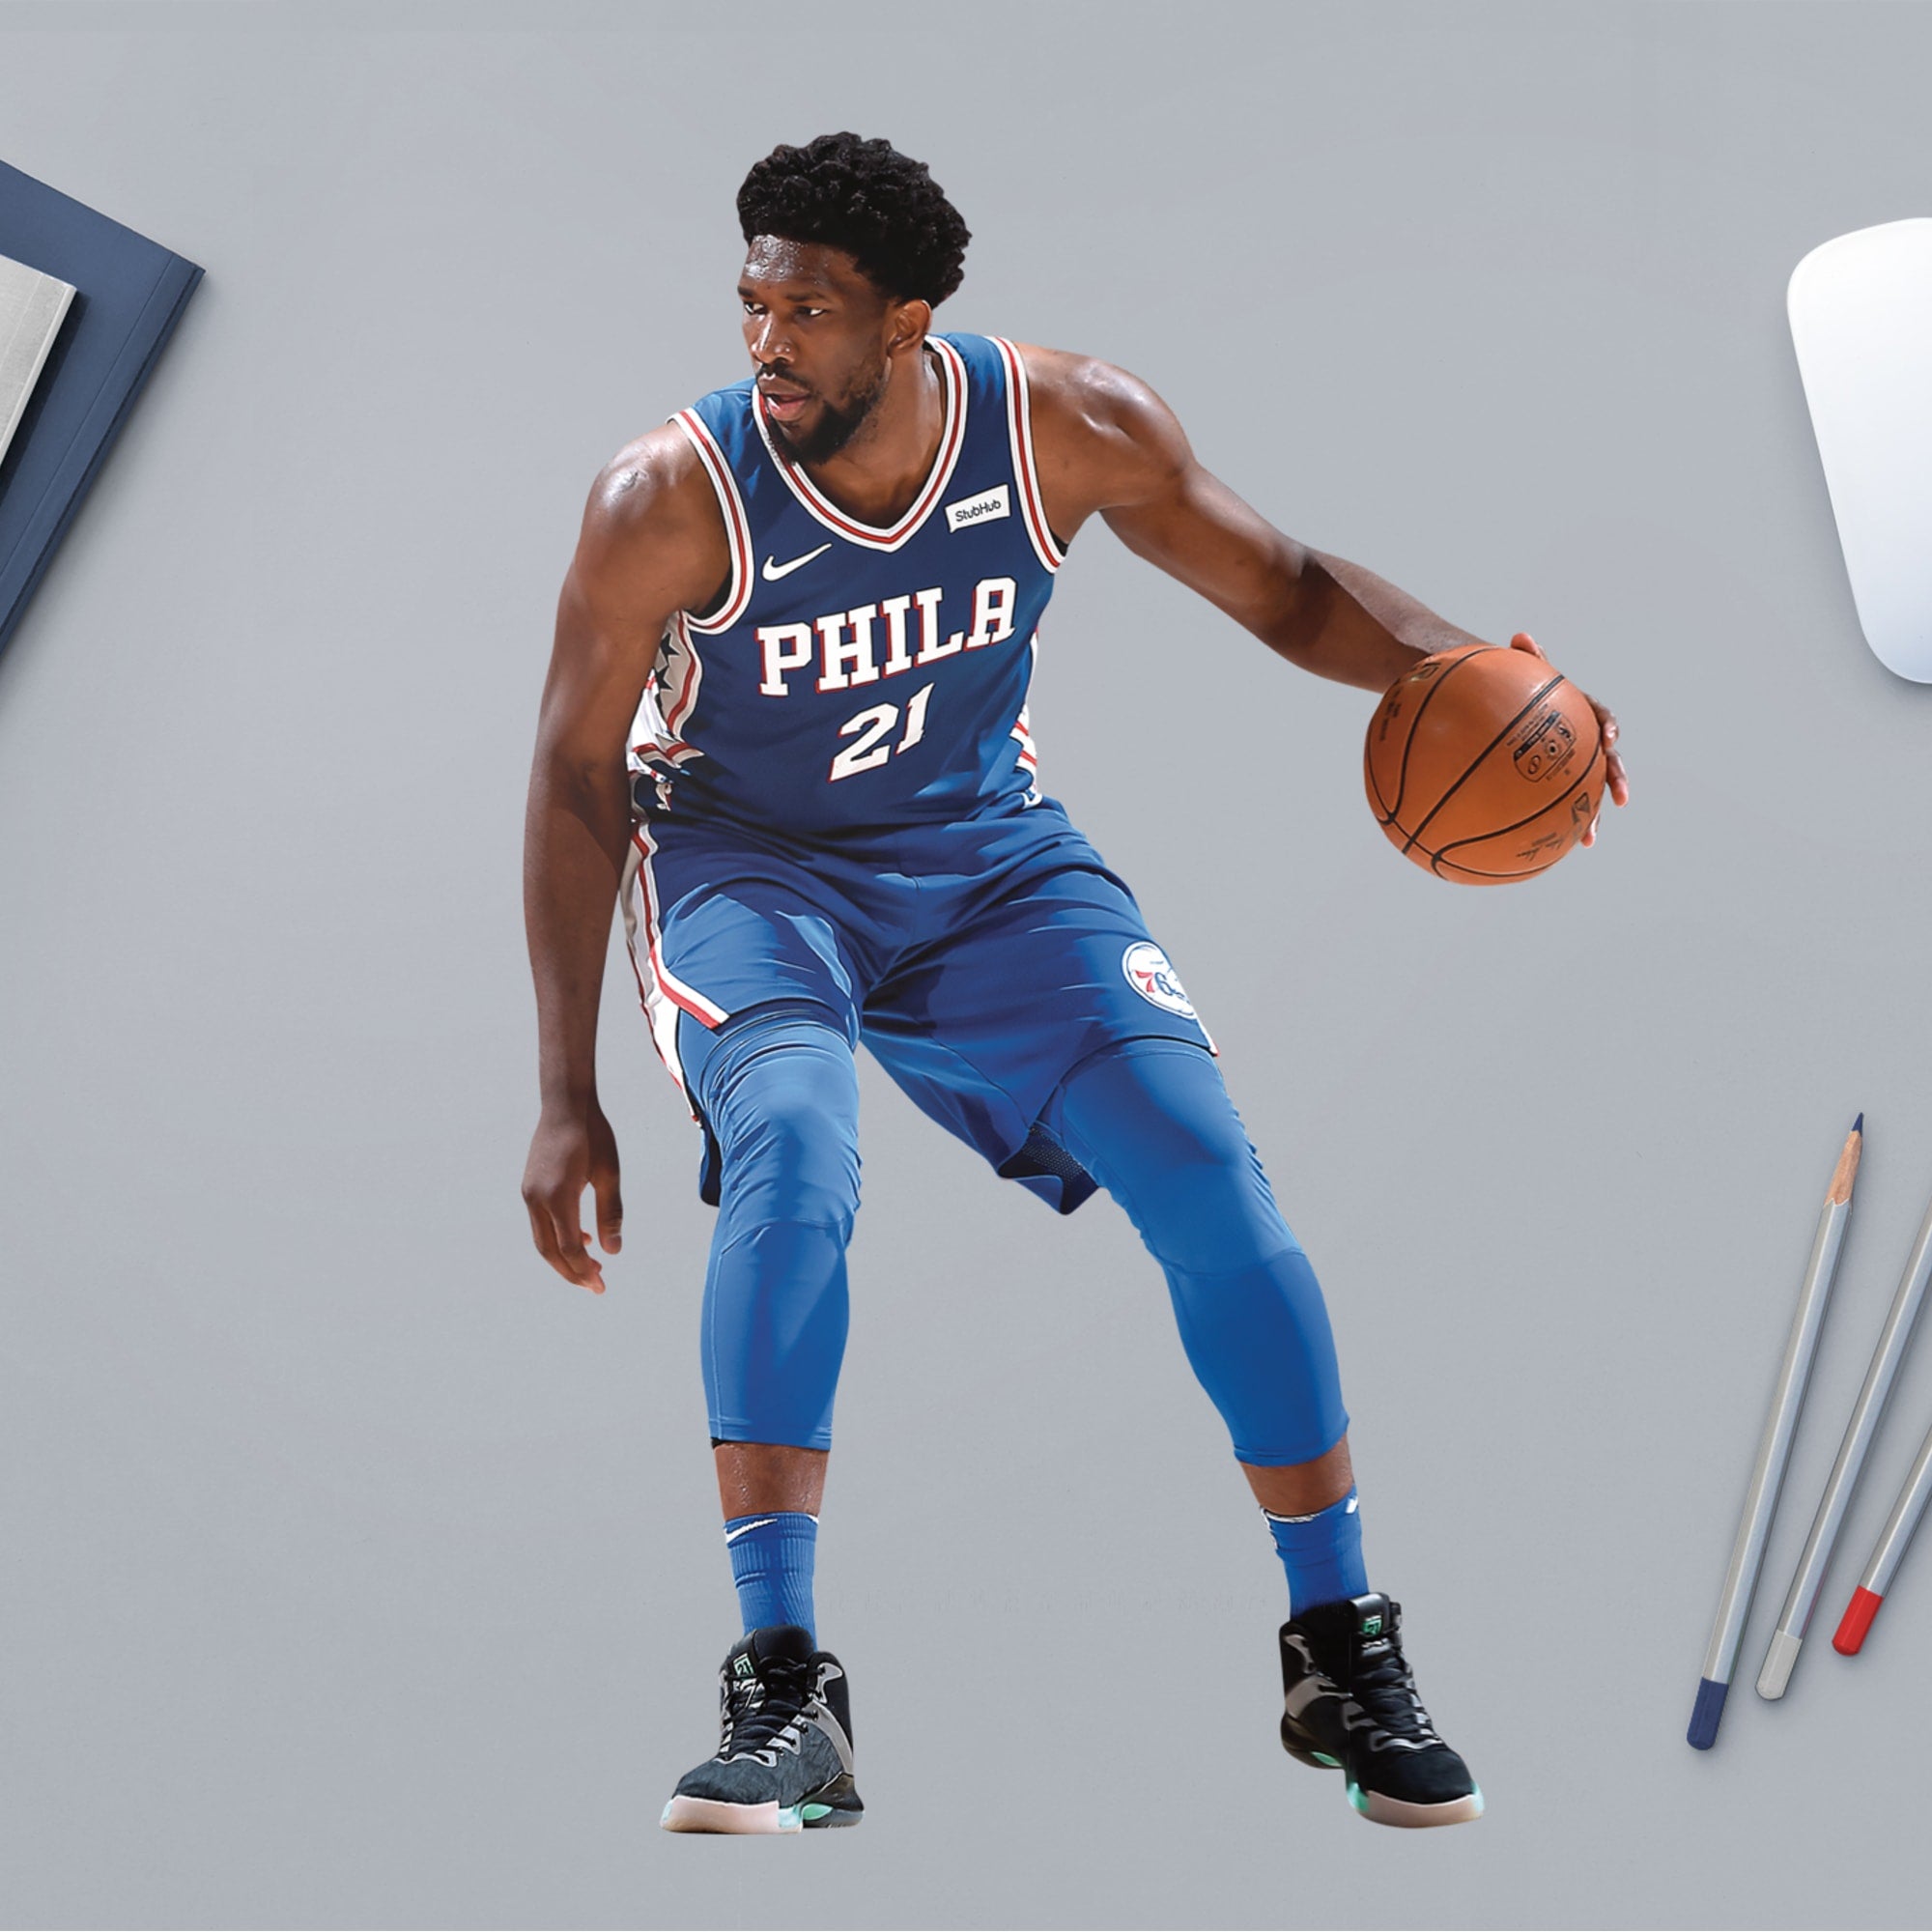 Joel Embiid for Philadelphia 76ers - Officially Licensed NBA Removable Wall Decal 11.0"W x 17.0"H by Fathead | Vinyl